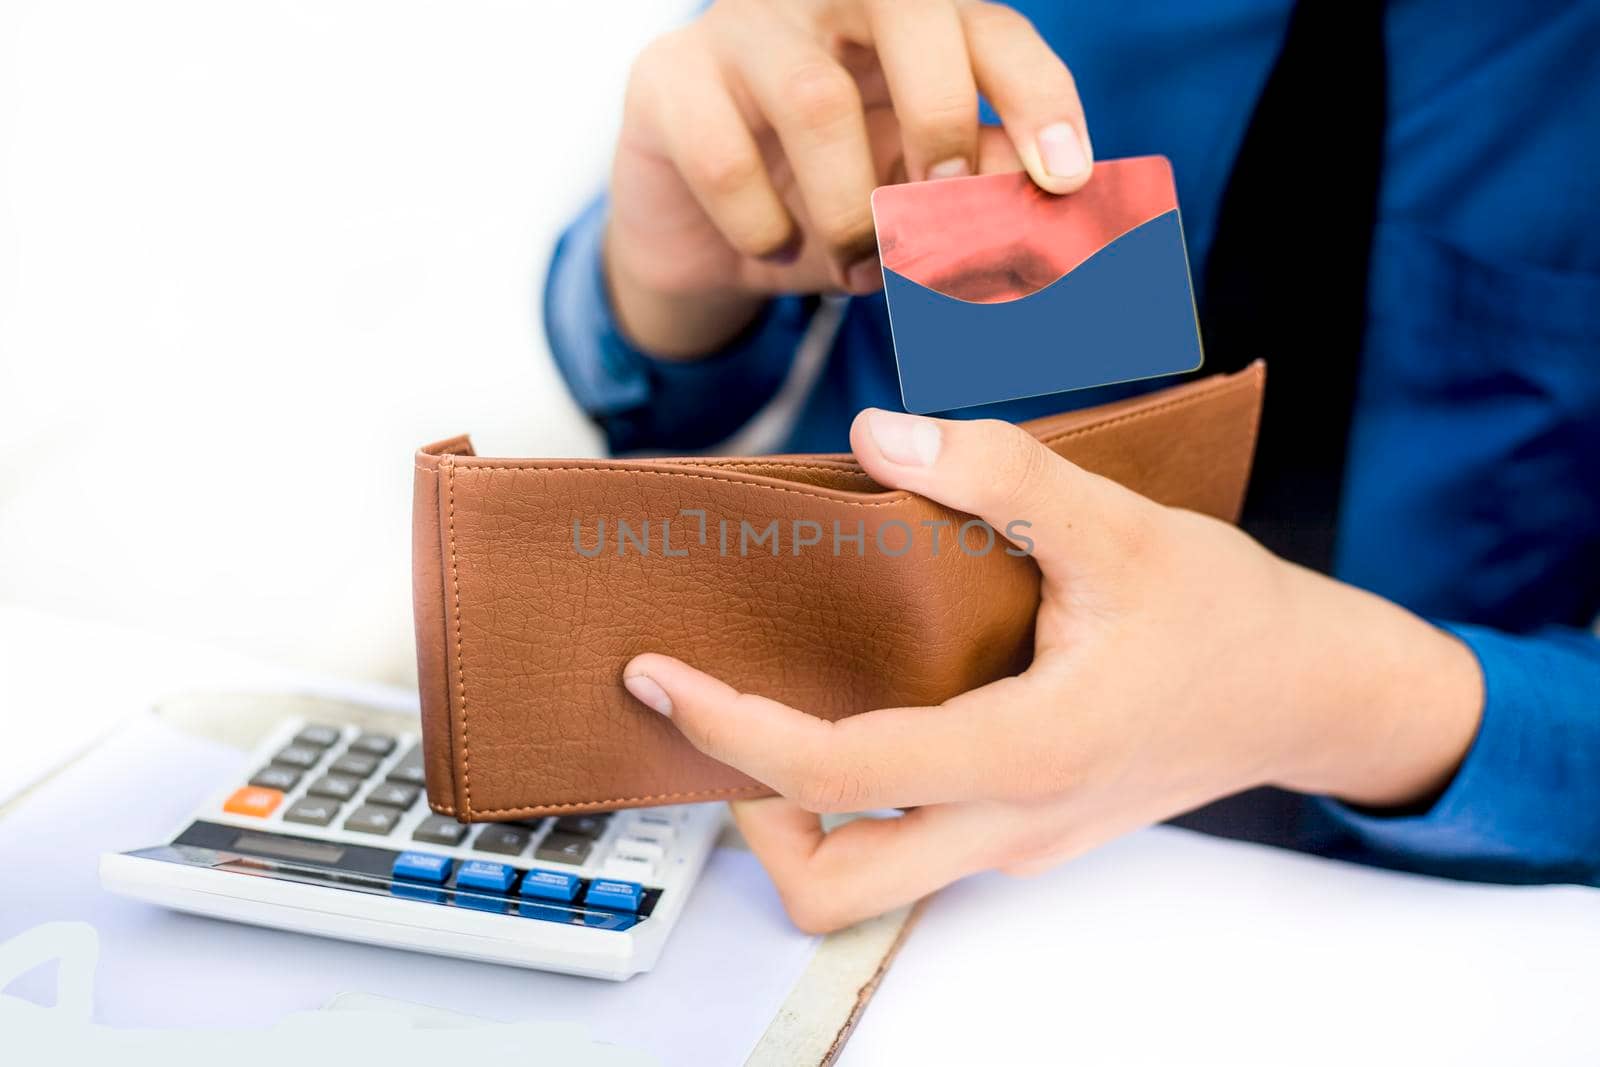 Businessman wearing a dark blue colored shirt with black tie and taking out his credit card from his brown colored wallet isolated on white. by mirzamlk